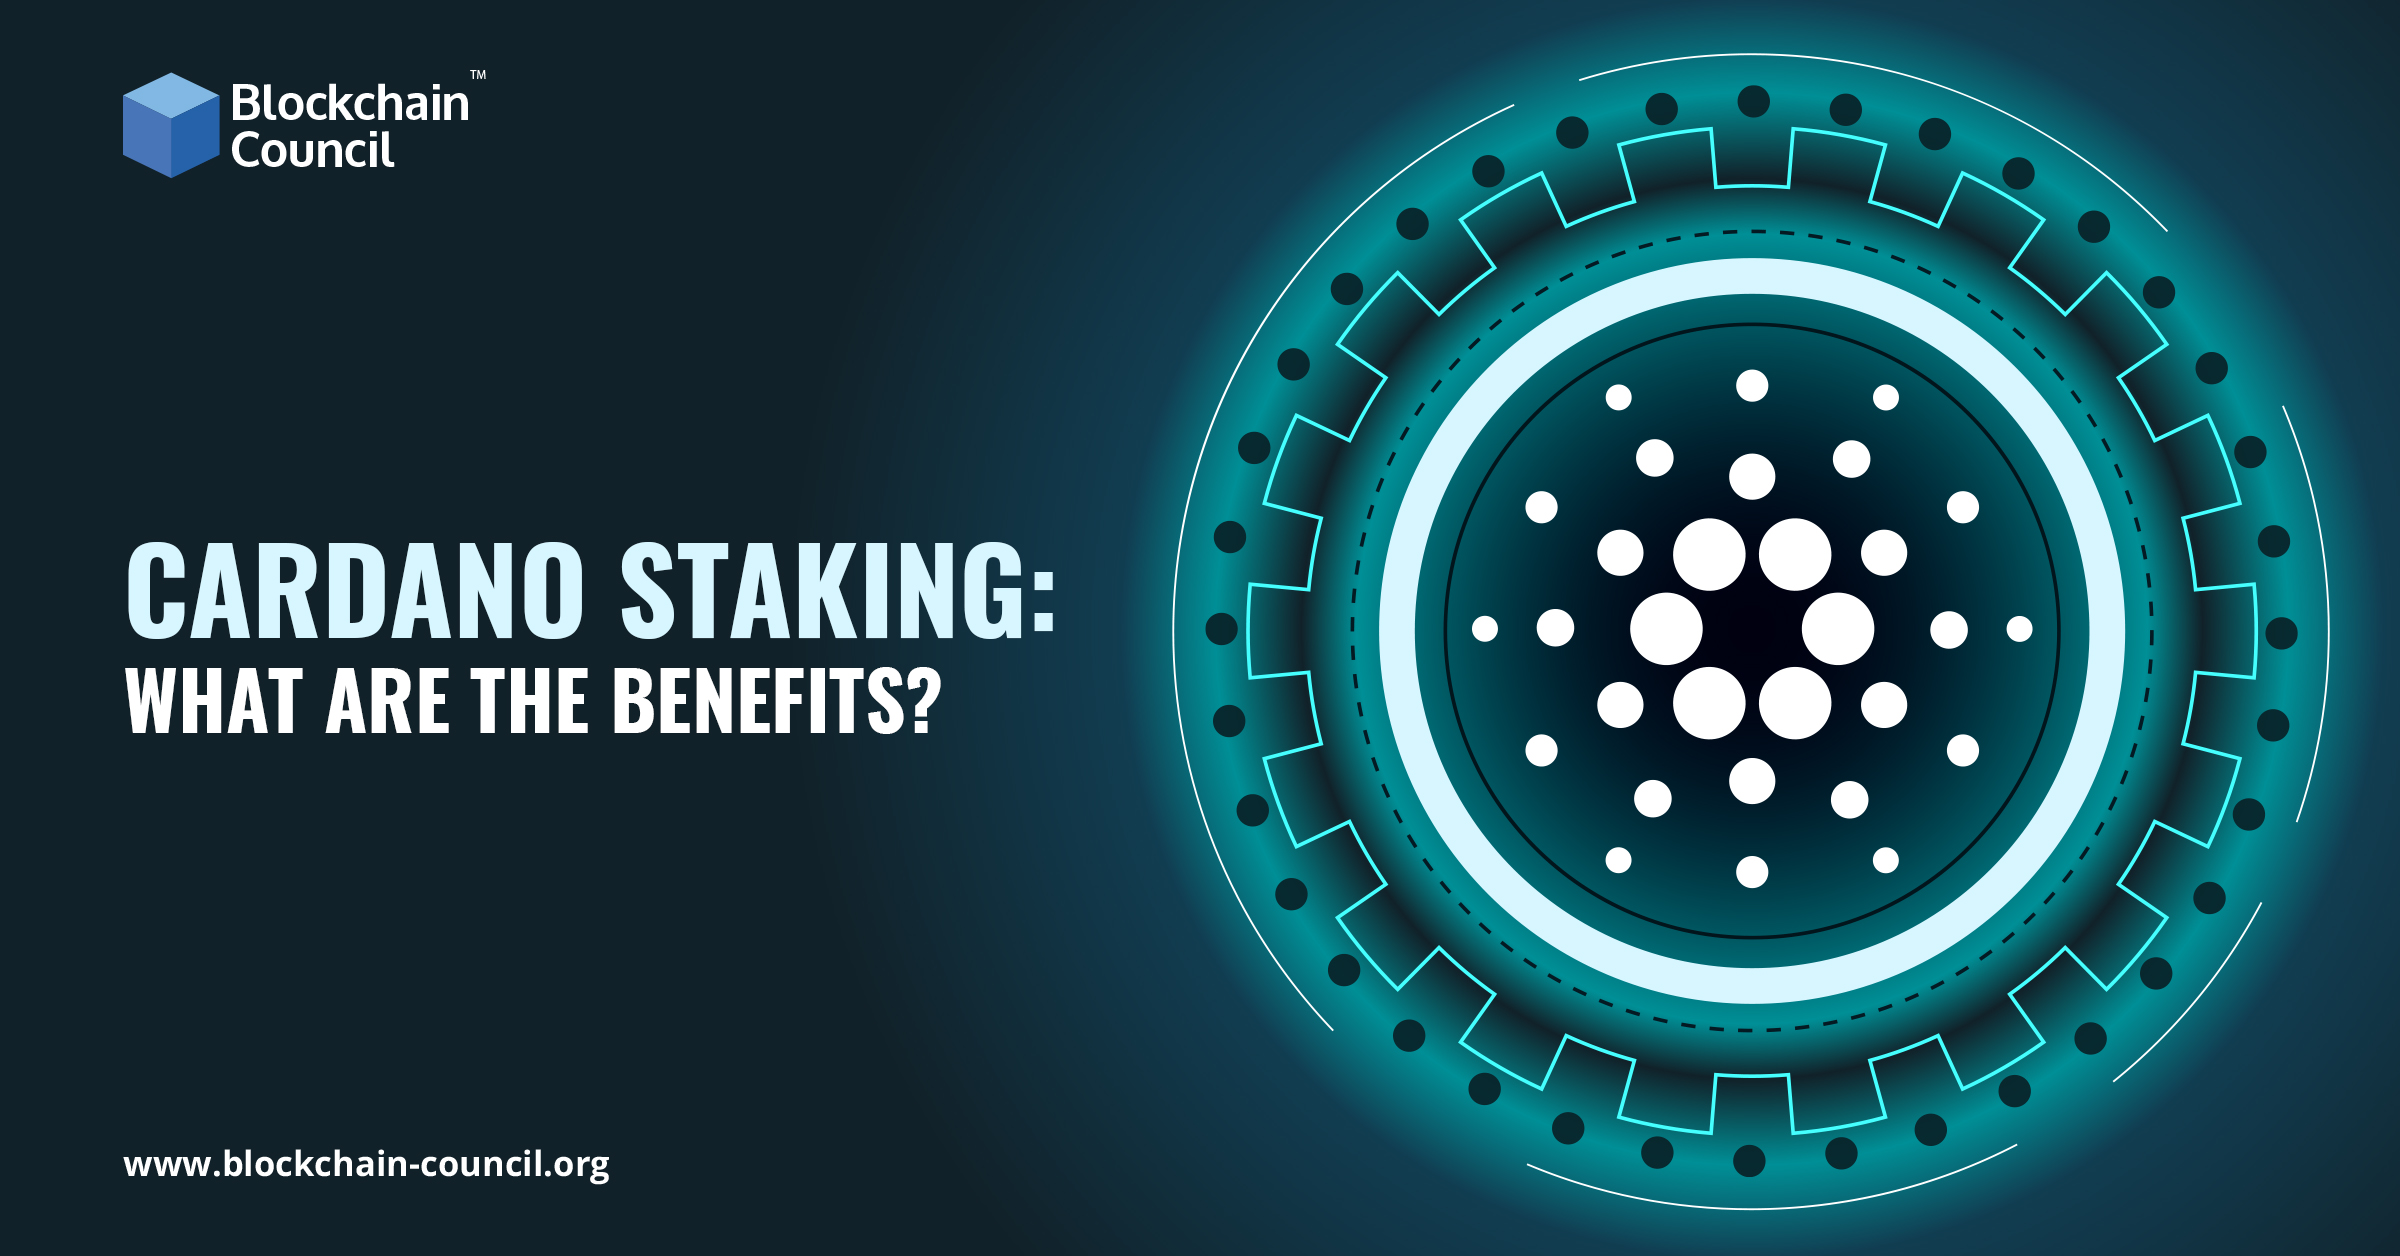 Cardano Staking: What are the benefits?